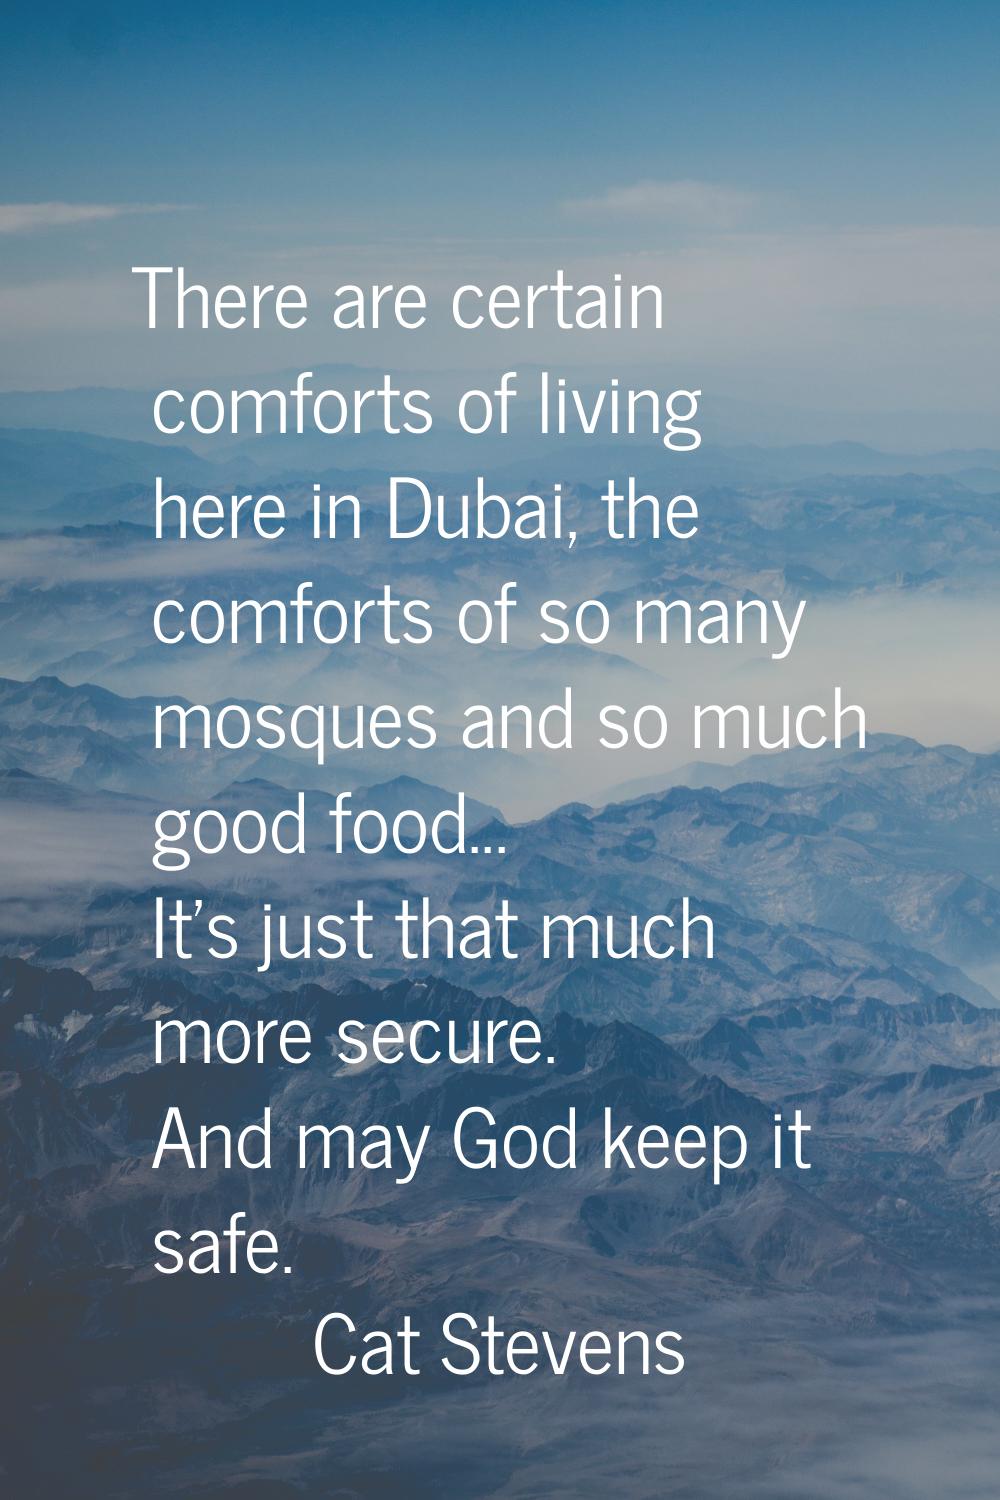 There are certain comforts of living here in Dubai, the comforts of so many mosques and so much goo